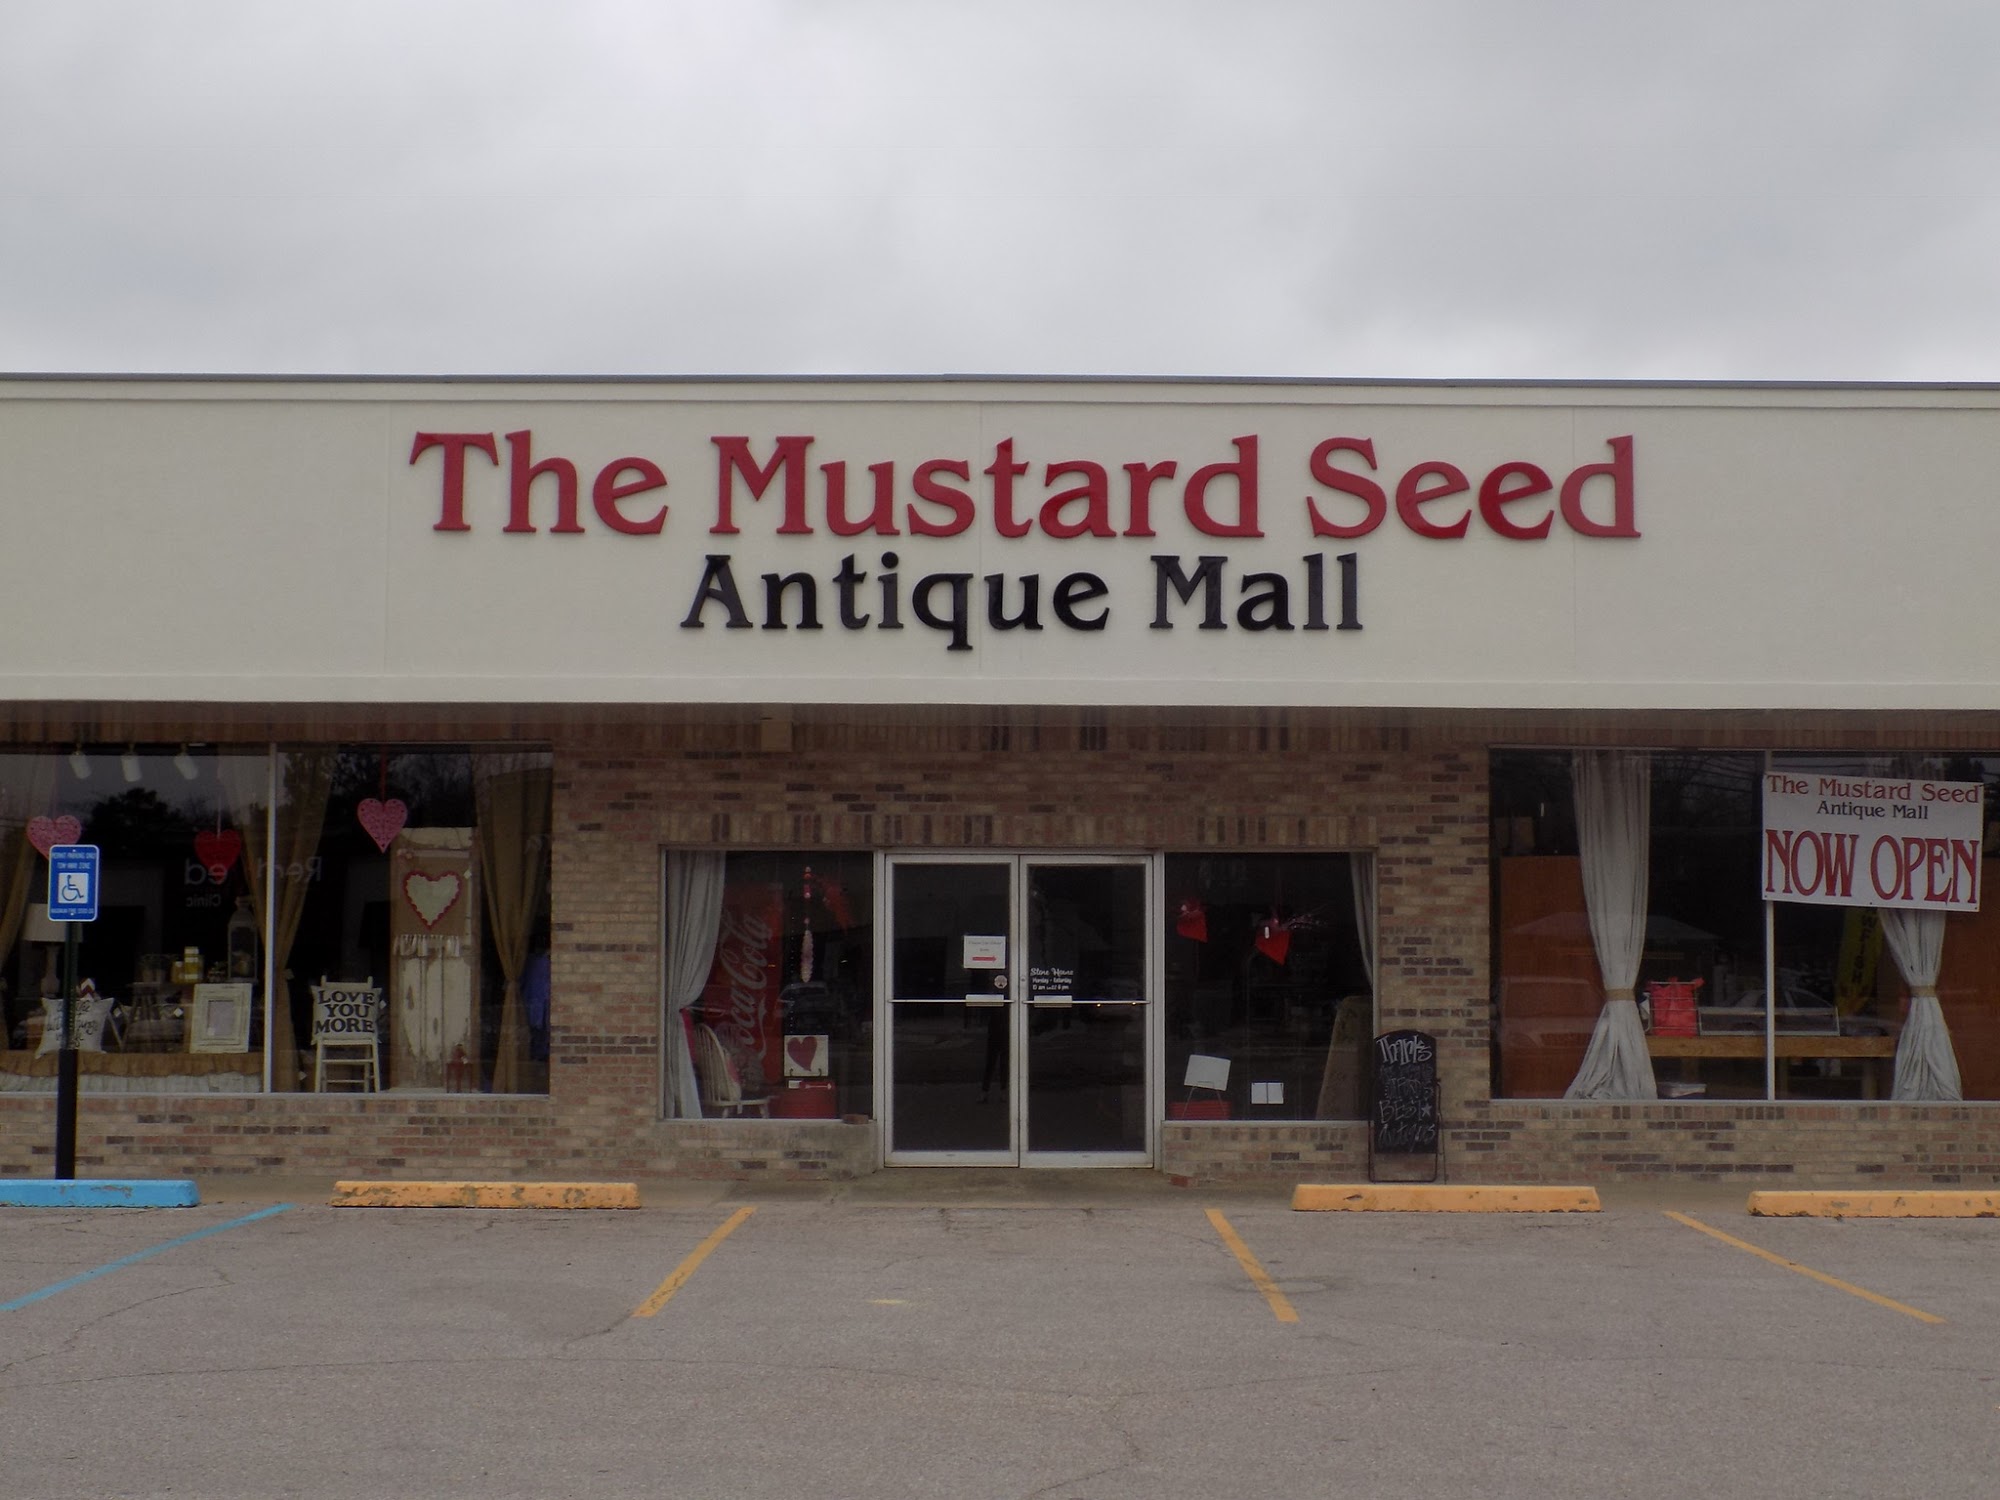 The Mustard Seed Antique Mall